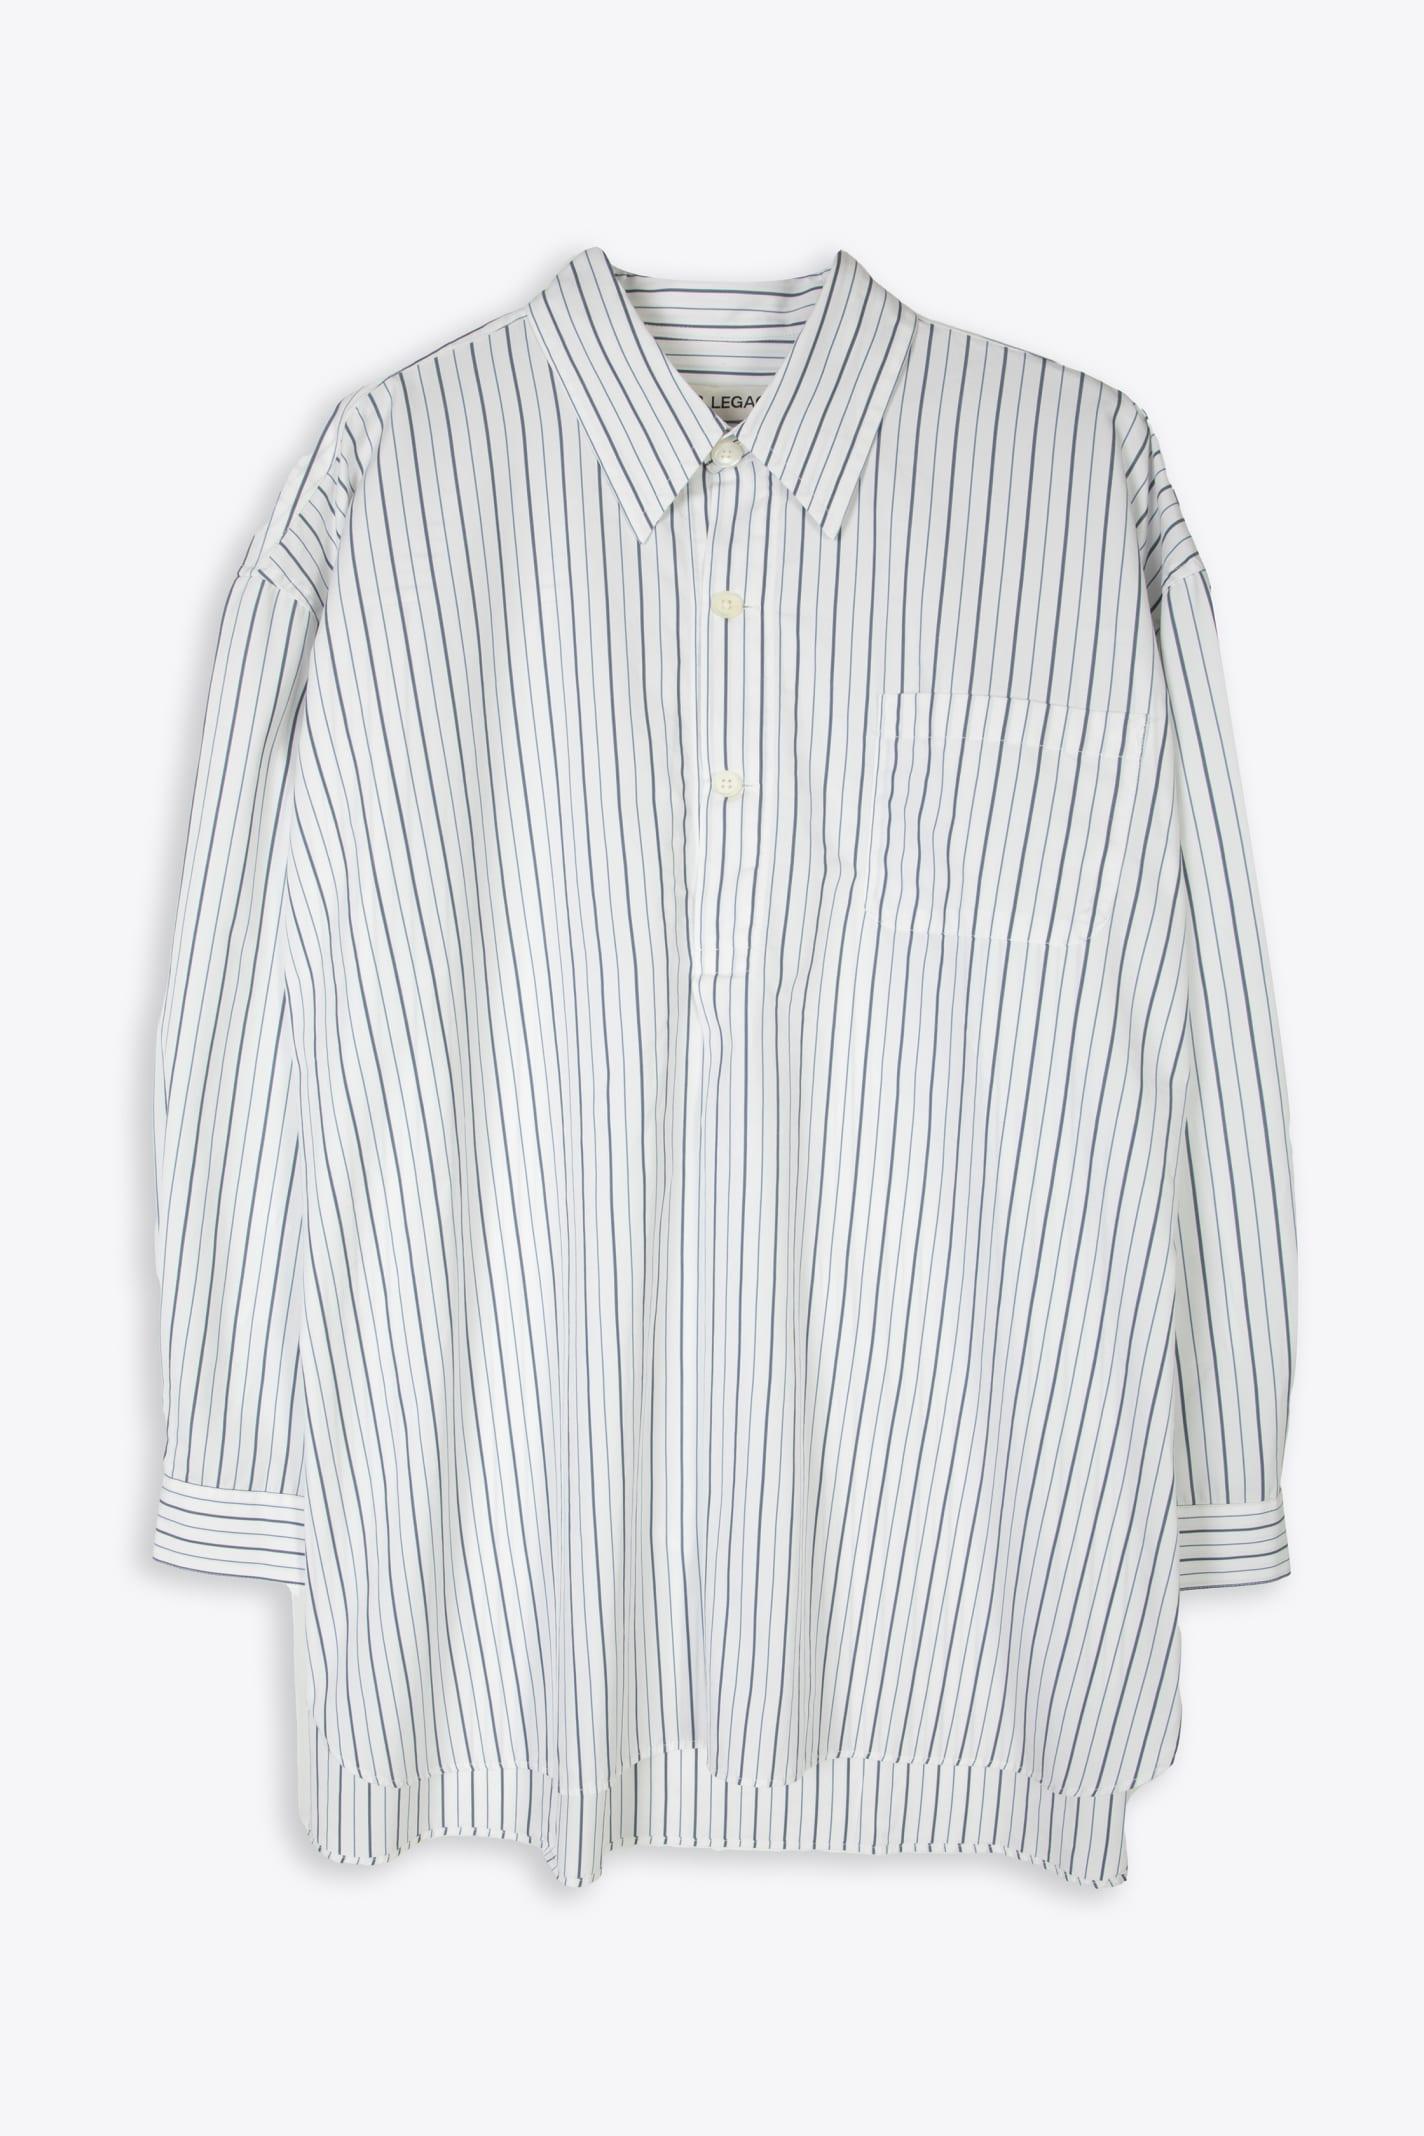 Our Legacy Popover Shirt White And Blue Striped Cotton Shirt - Popover ...